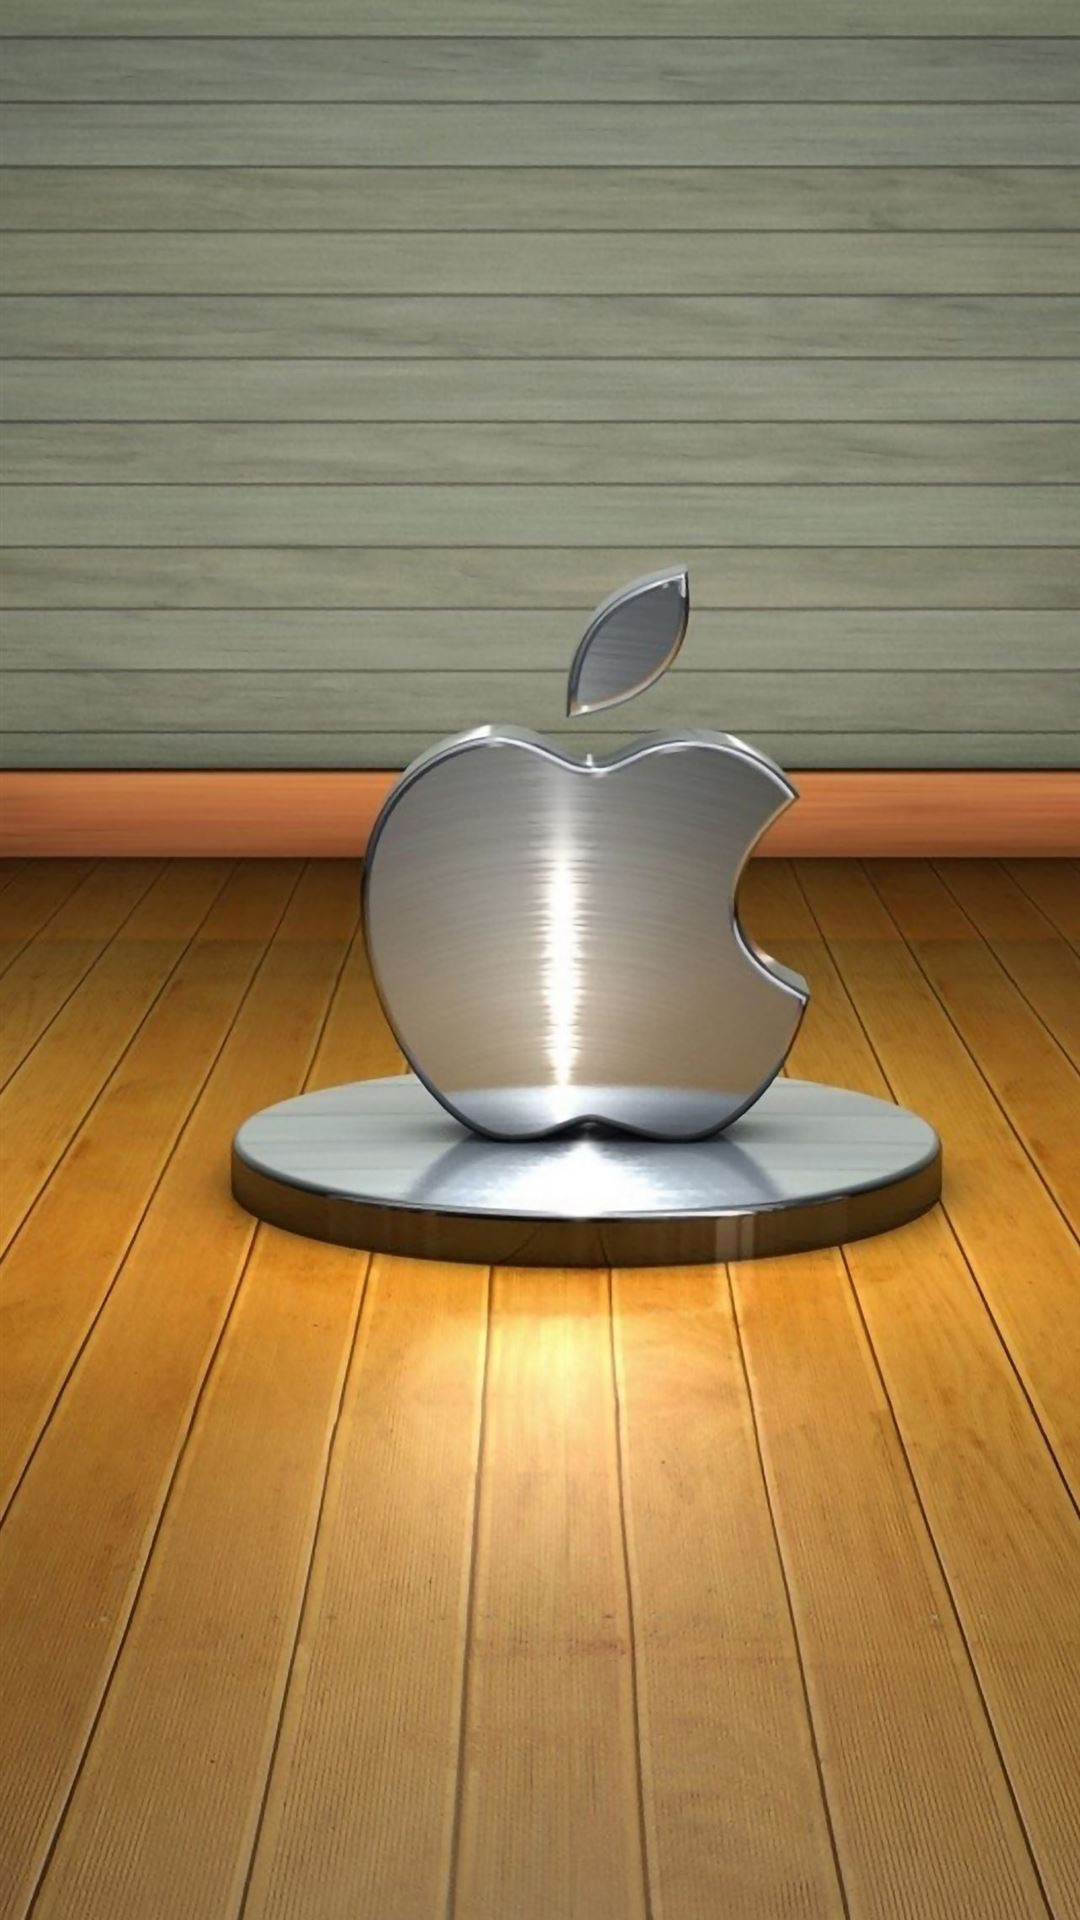 3D Apple Logo iPhone Wallpapers Free Download